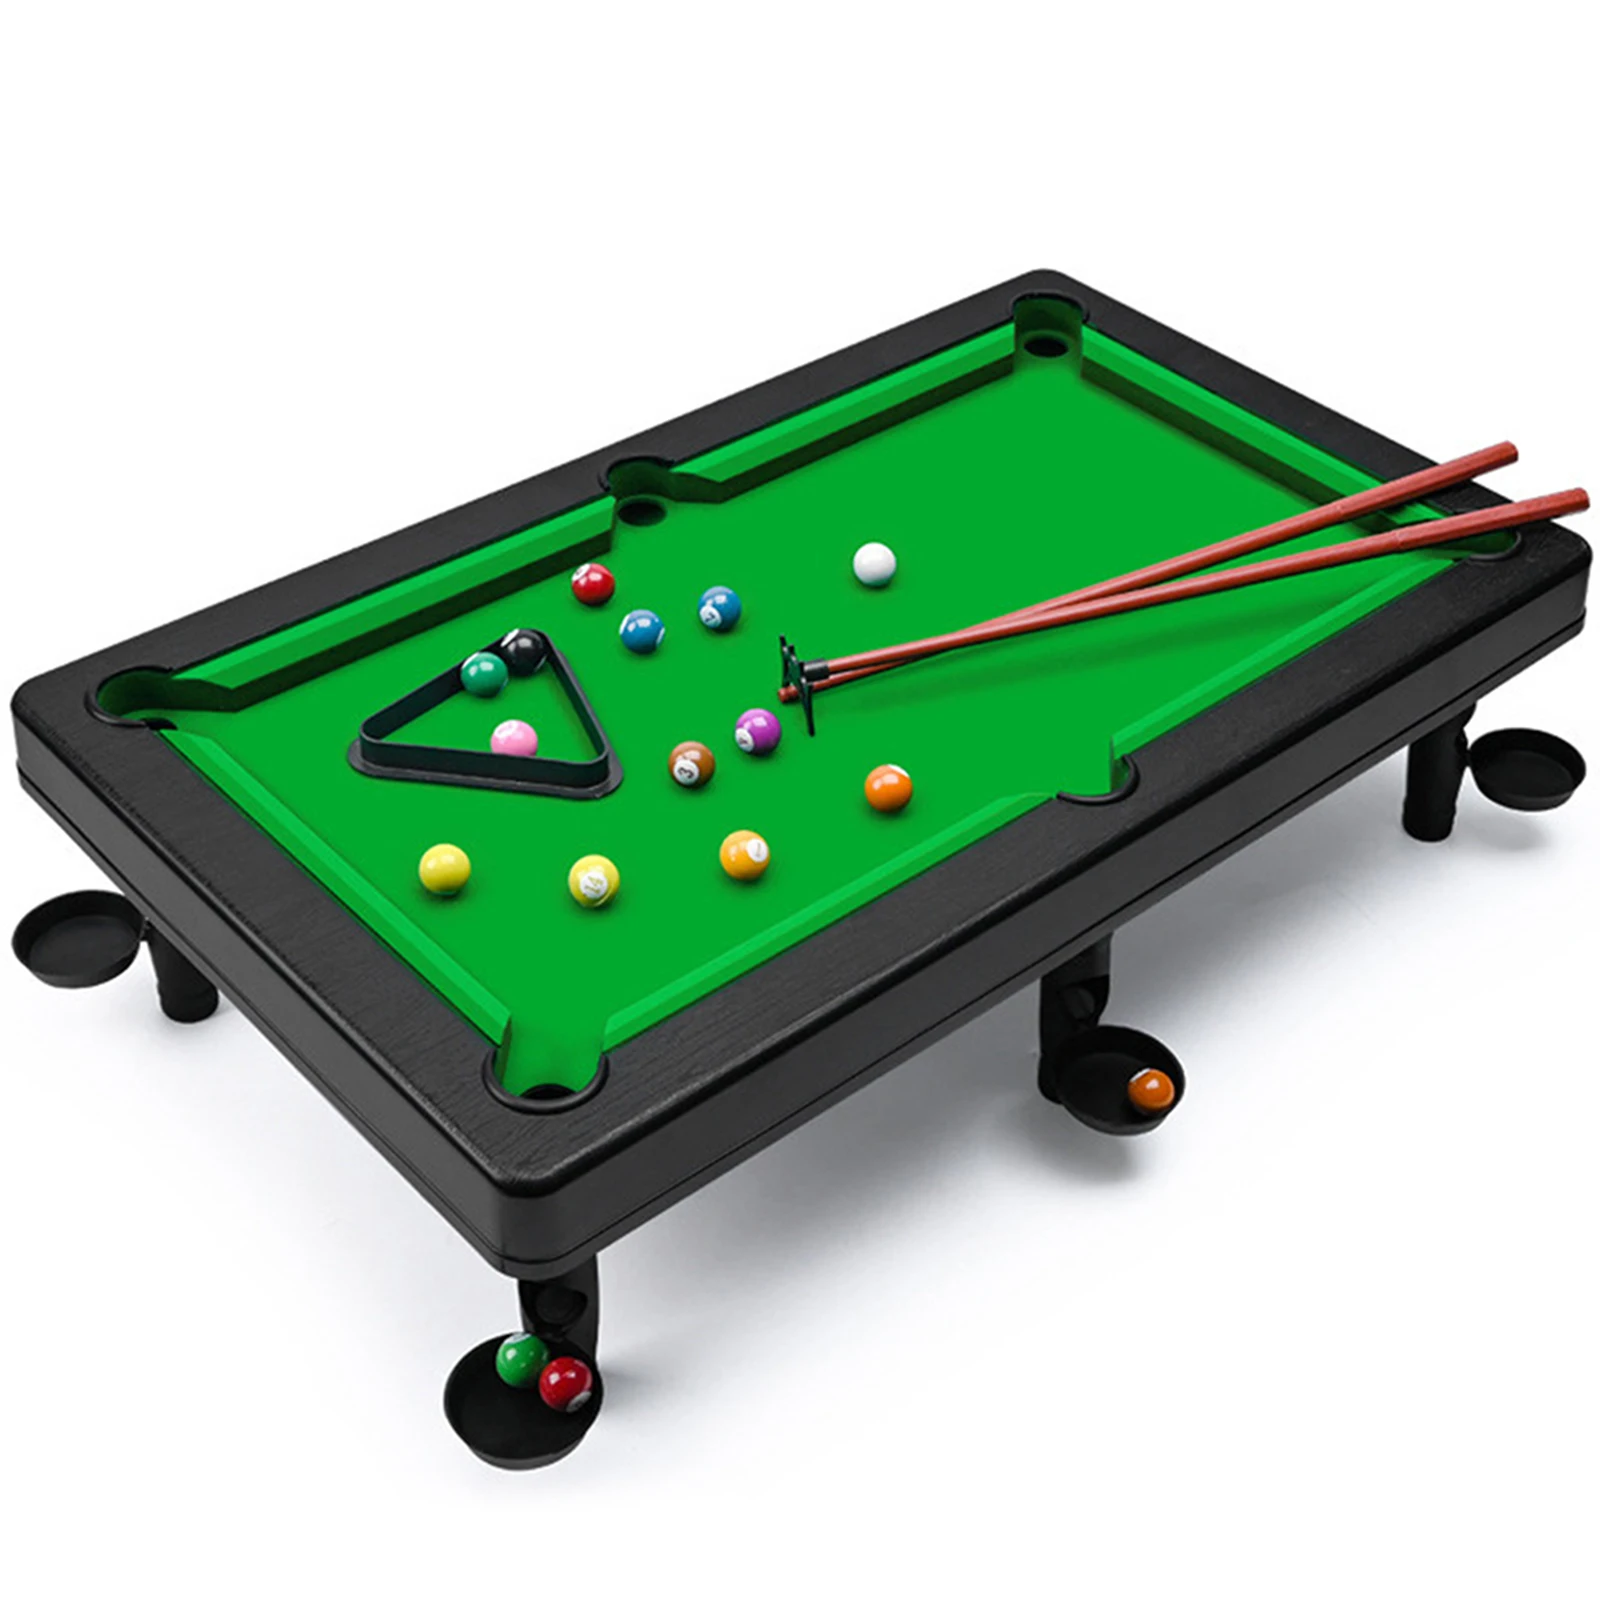 For Kids Adults Ball Table Pool Table Indoor Games For Stress Relief Stability 1sets Burr-free COMPACT Full-sized